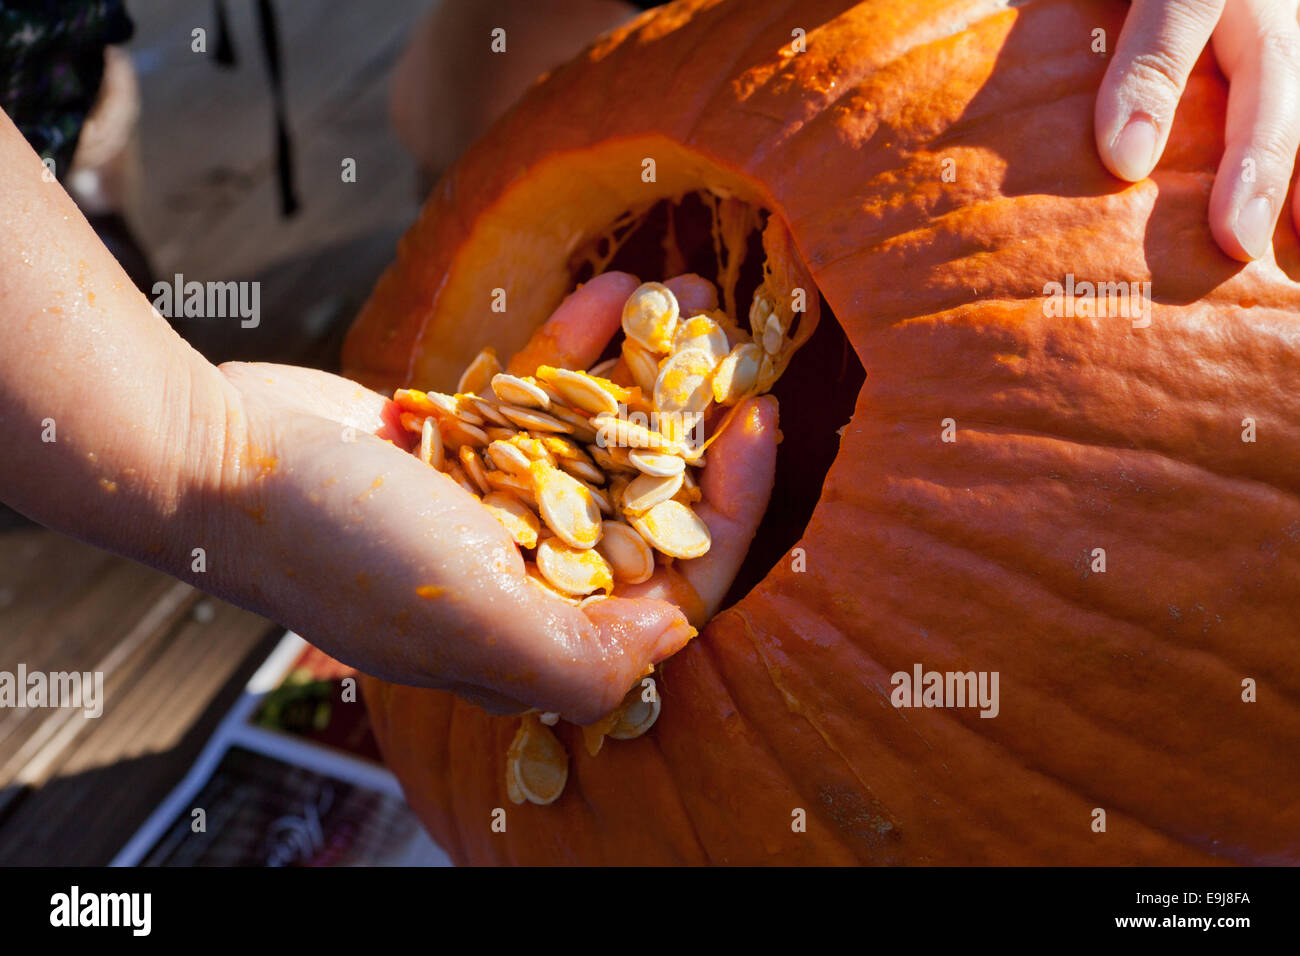 Woman removing seeds from pumpkin - USA Stock Photo